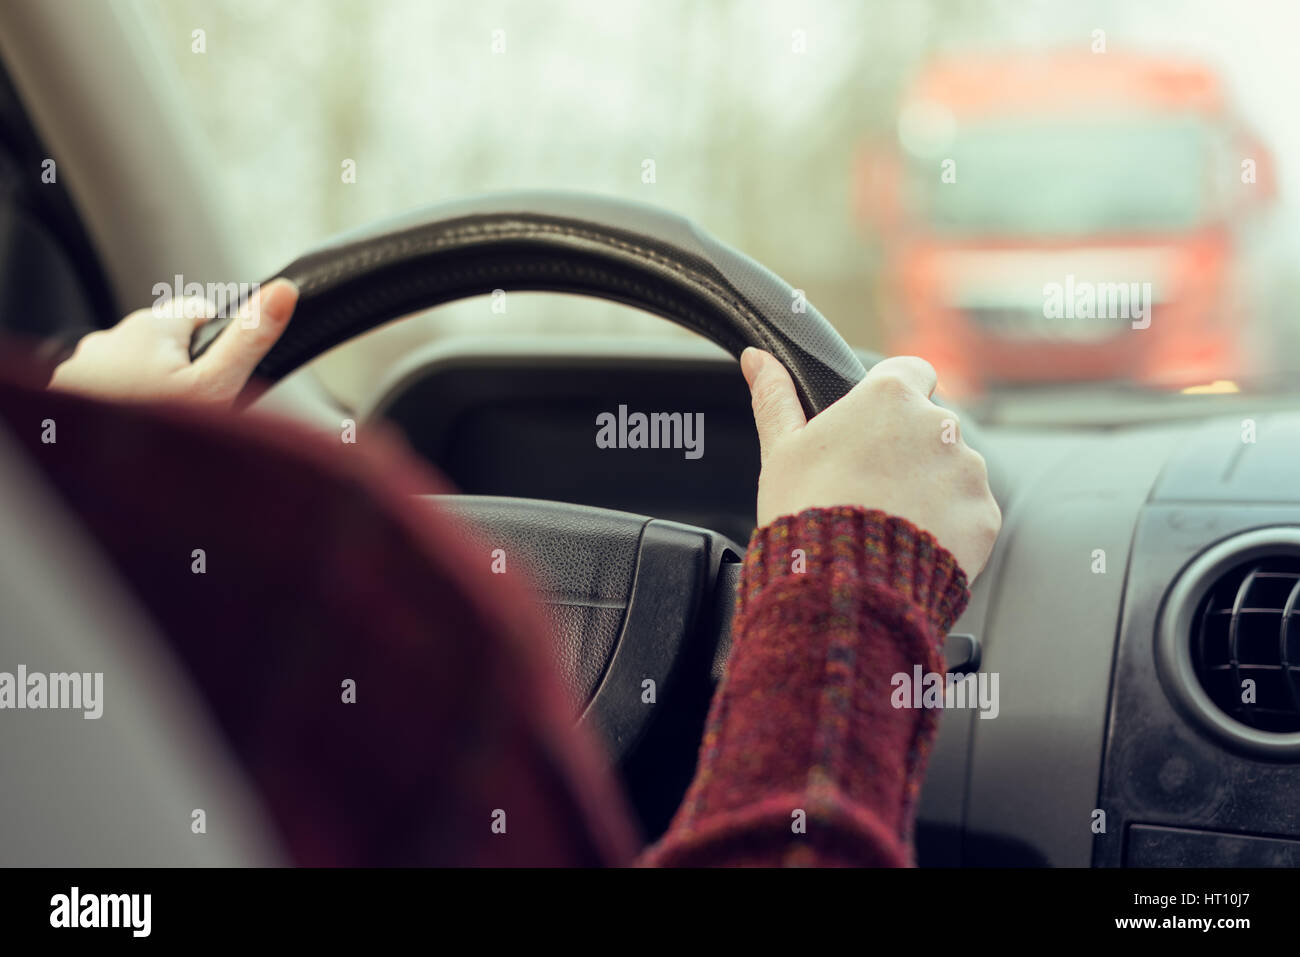 Woman driving car toward a large truck on the road, selective focus on hands gripping the steering wheel of the vehicle, retro toned image Stock Photo